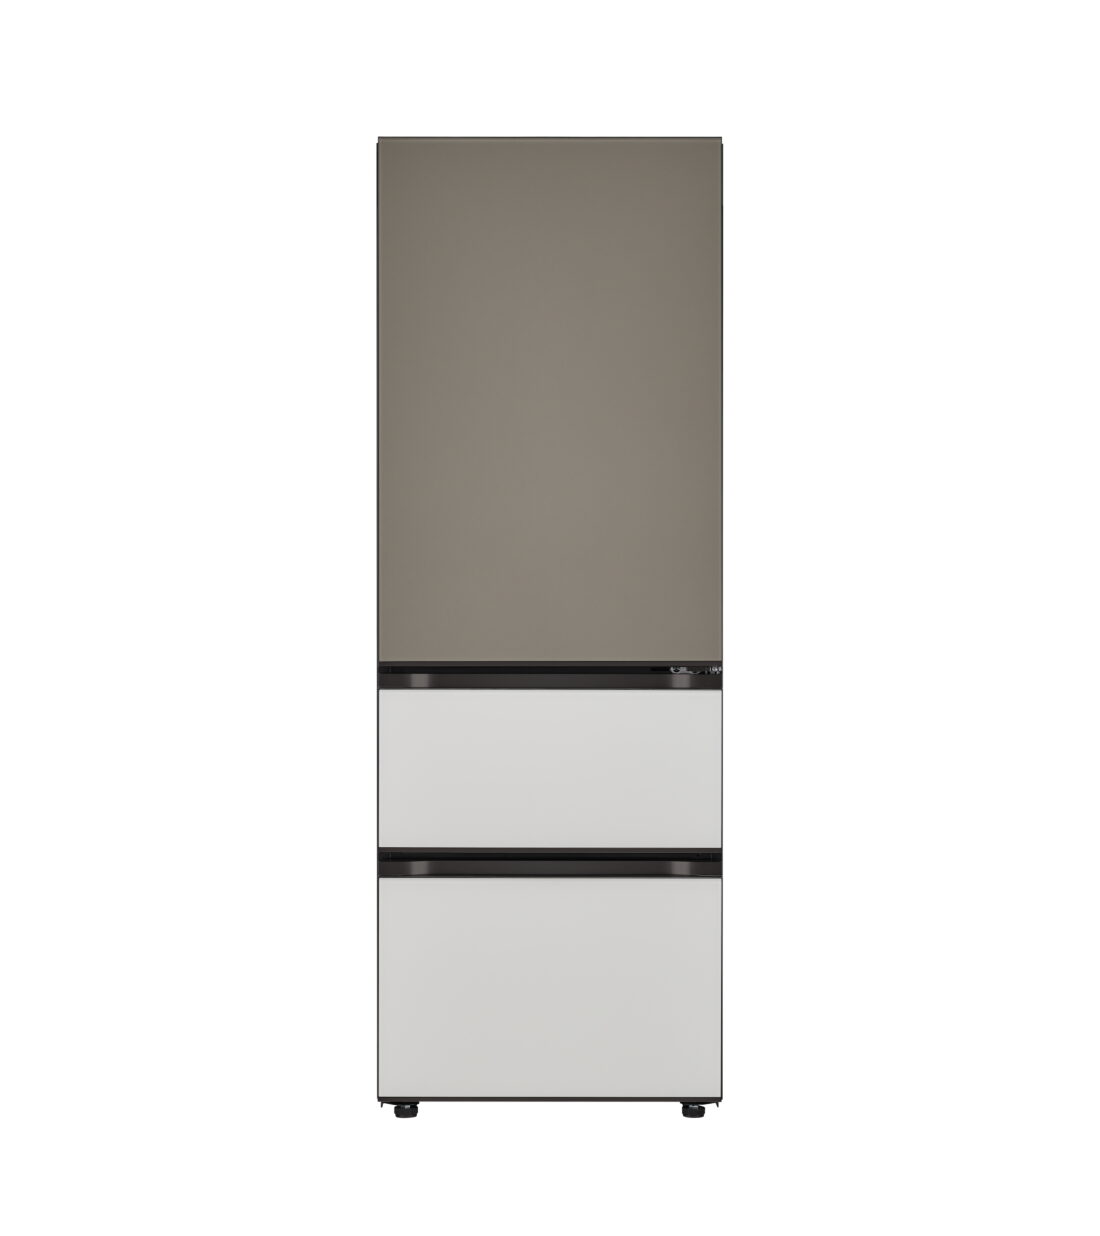 LG MoodUPTM kimchi refrigerator in Lux Gray and Lux White color